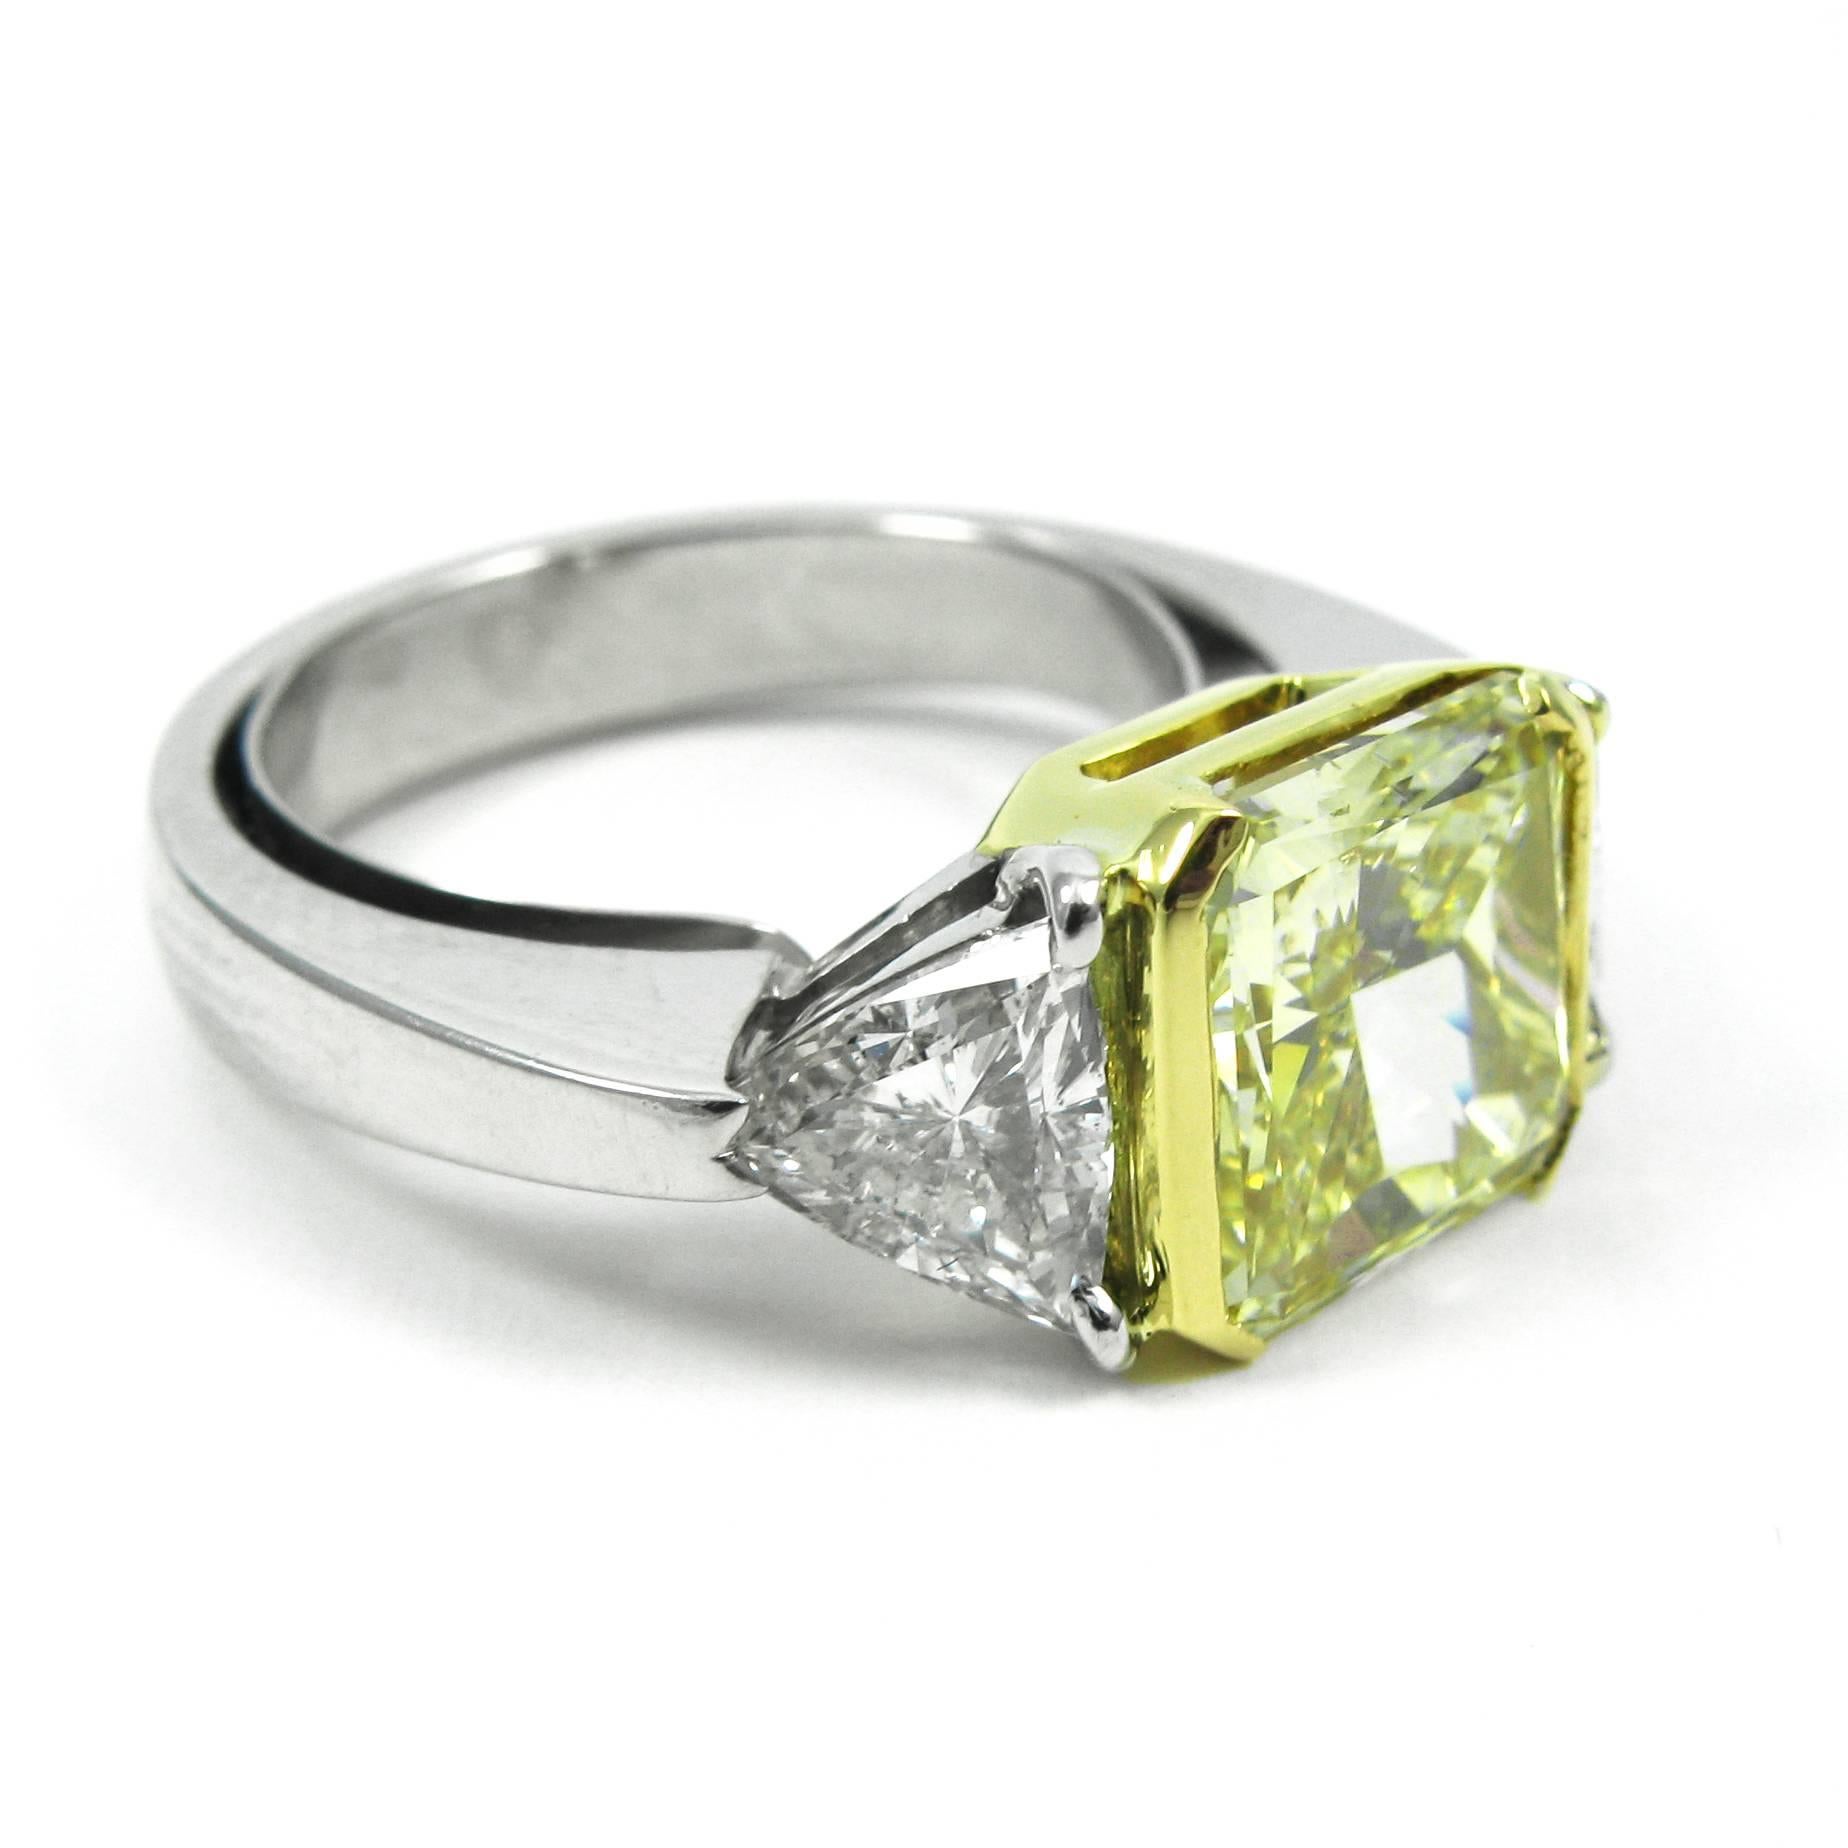 Trillion Cut GIA Certified 3.23 Carat Fancy Yellow and White Diamond Gold Three-Stone Ring